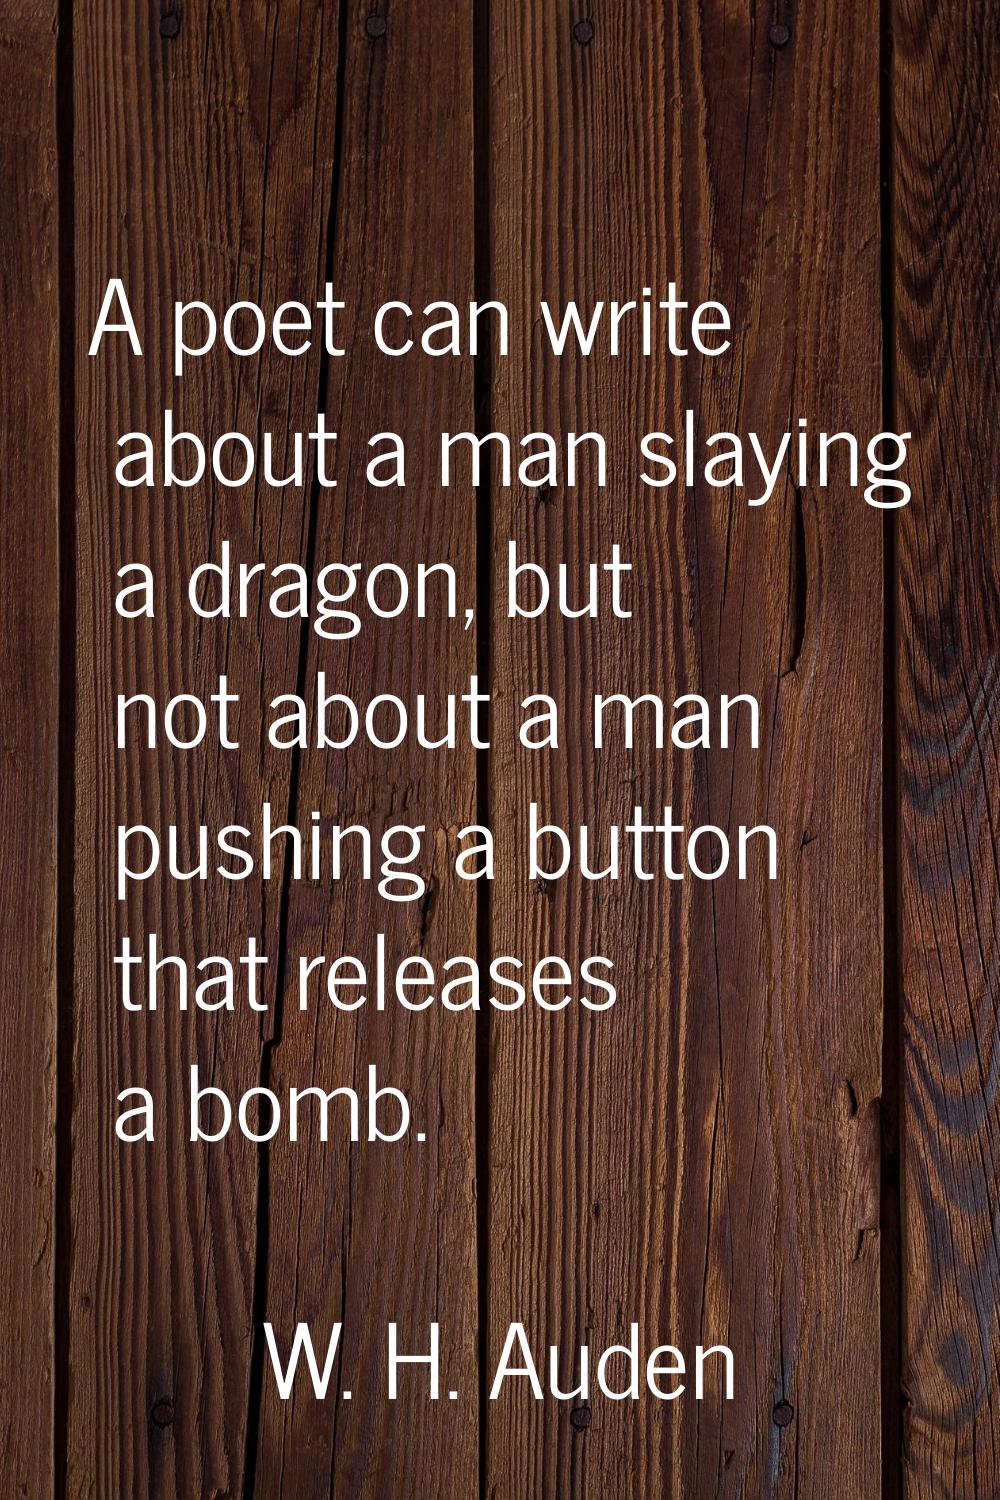 A poet can write about a man slaying a dragon, but not about a man pushing a button that releases a